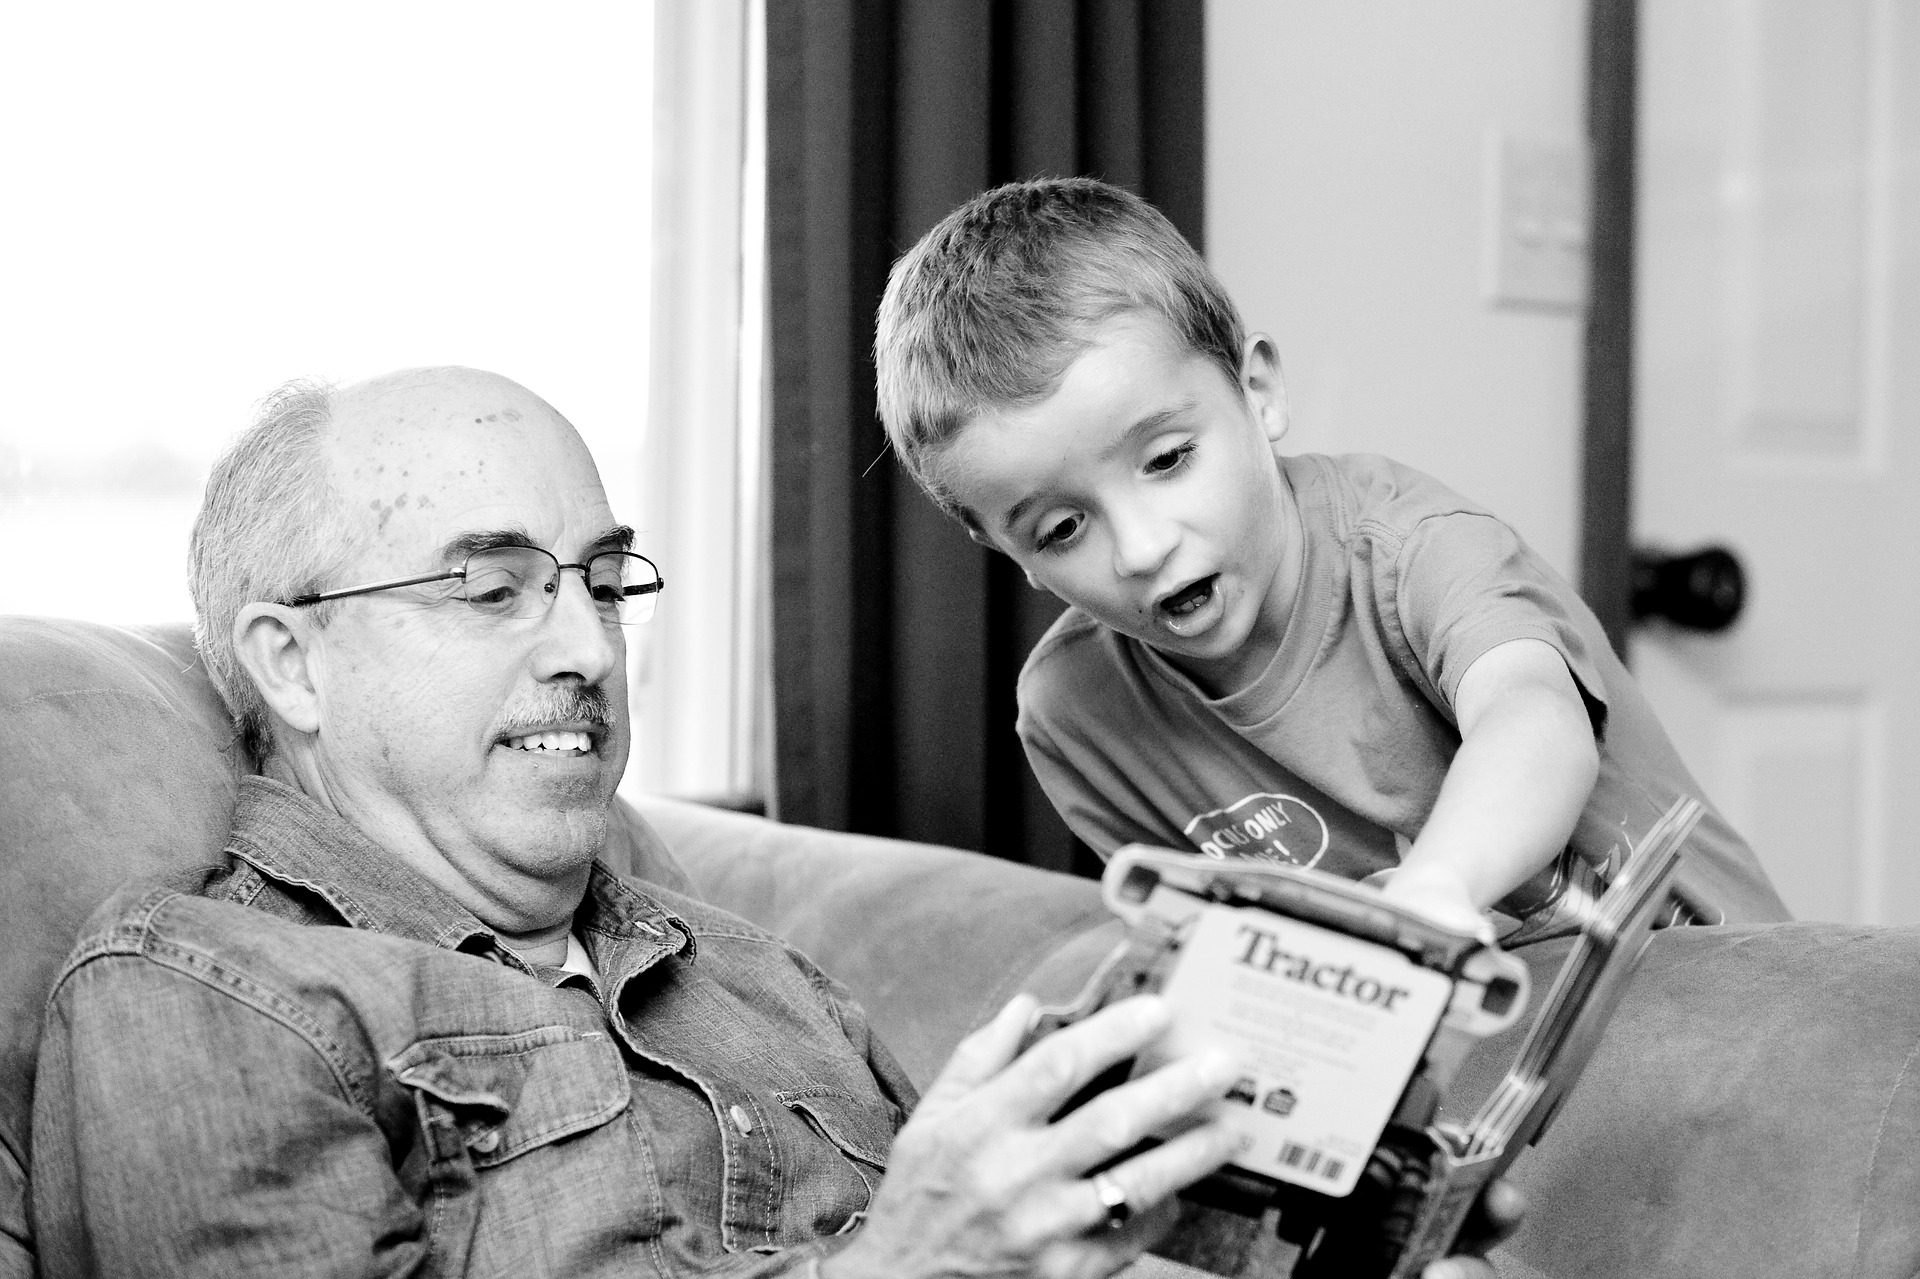 Black and white photo of an older man sitting on a couch holding a book, while a young boy looks on.